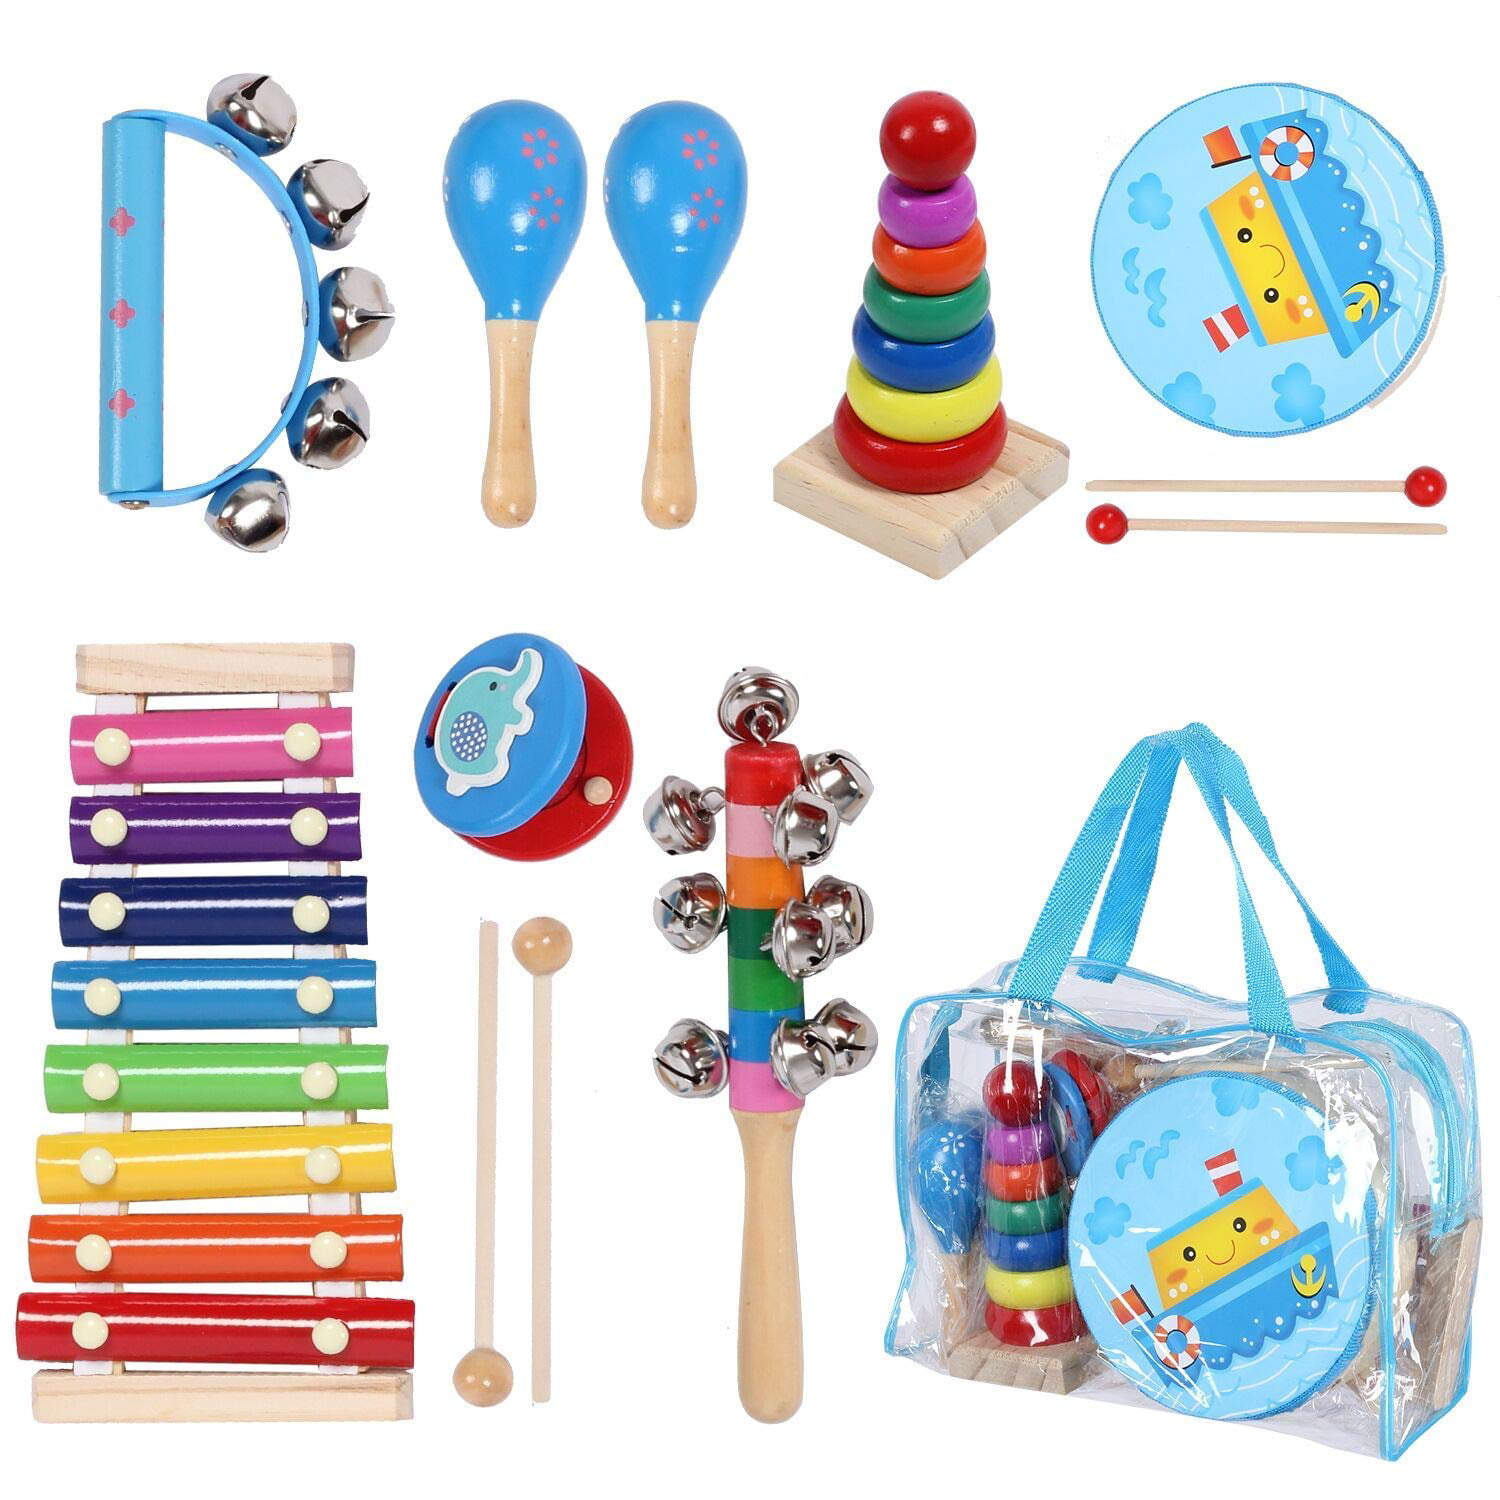 Kmise Toddler Musical Instruments 12 Types Wooden Percussion Instruments Tambourine Xylophone Early Learning Musical Toys Set for Kids for Boys GirlsPreschool Education with Bag